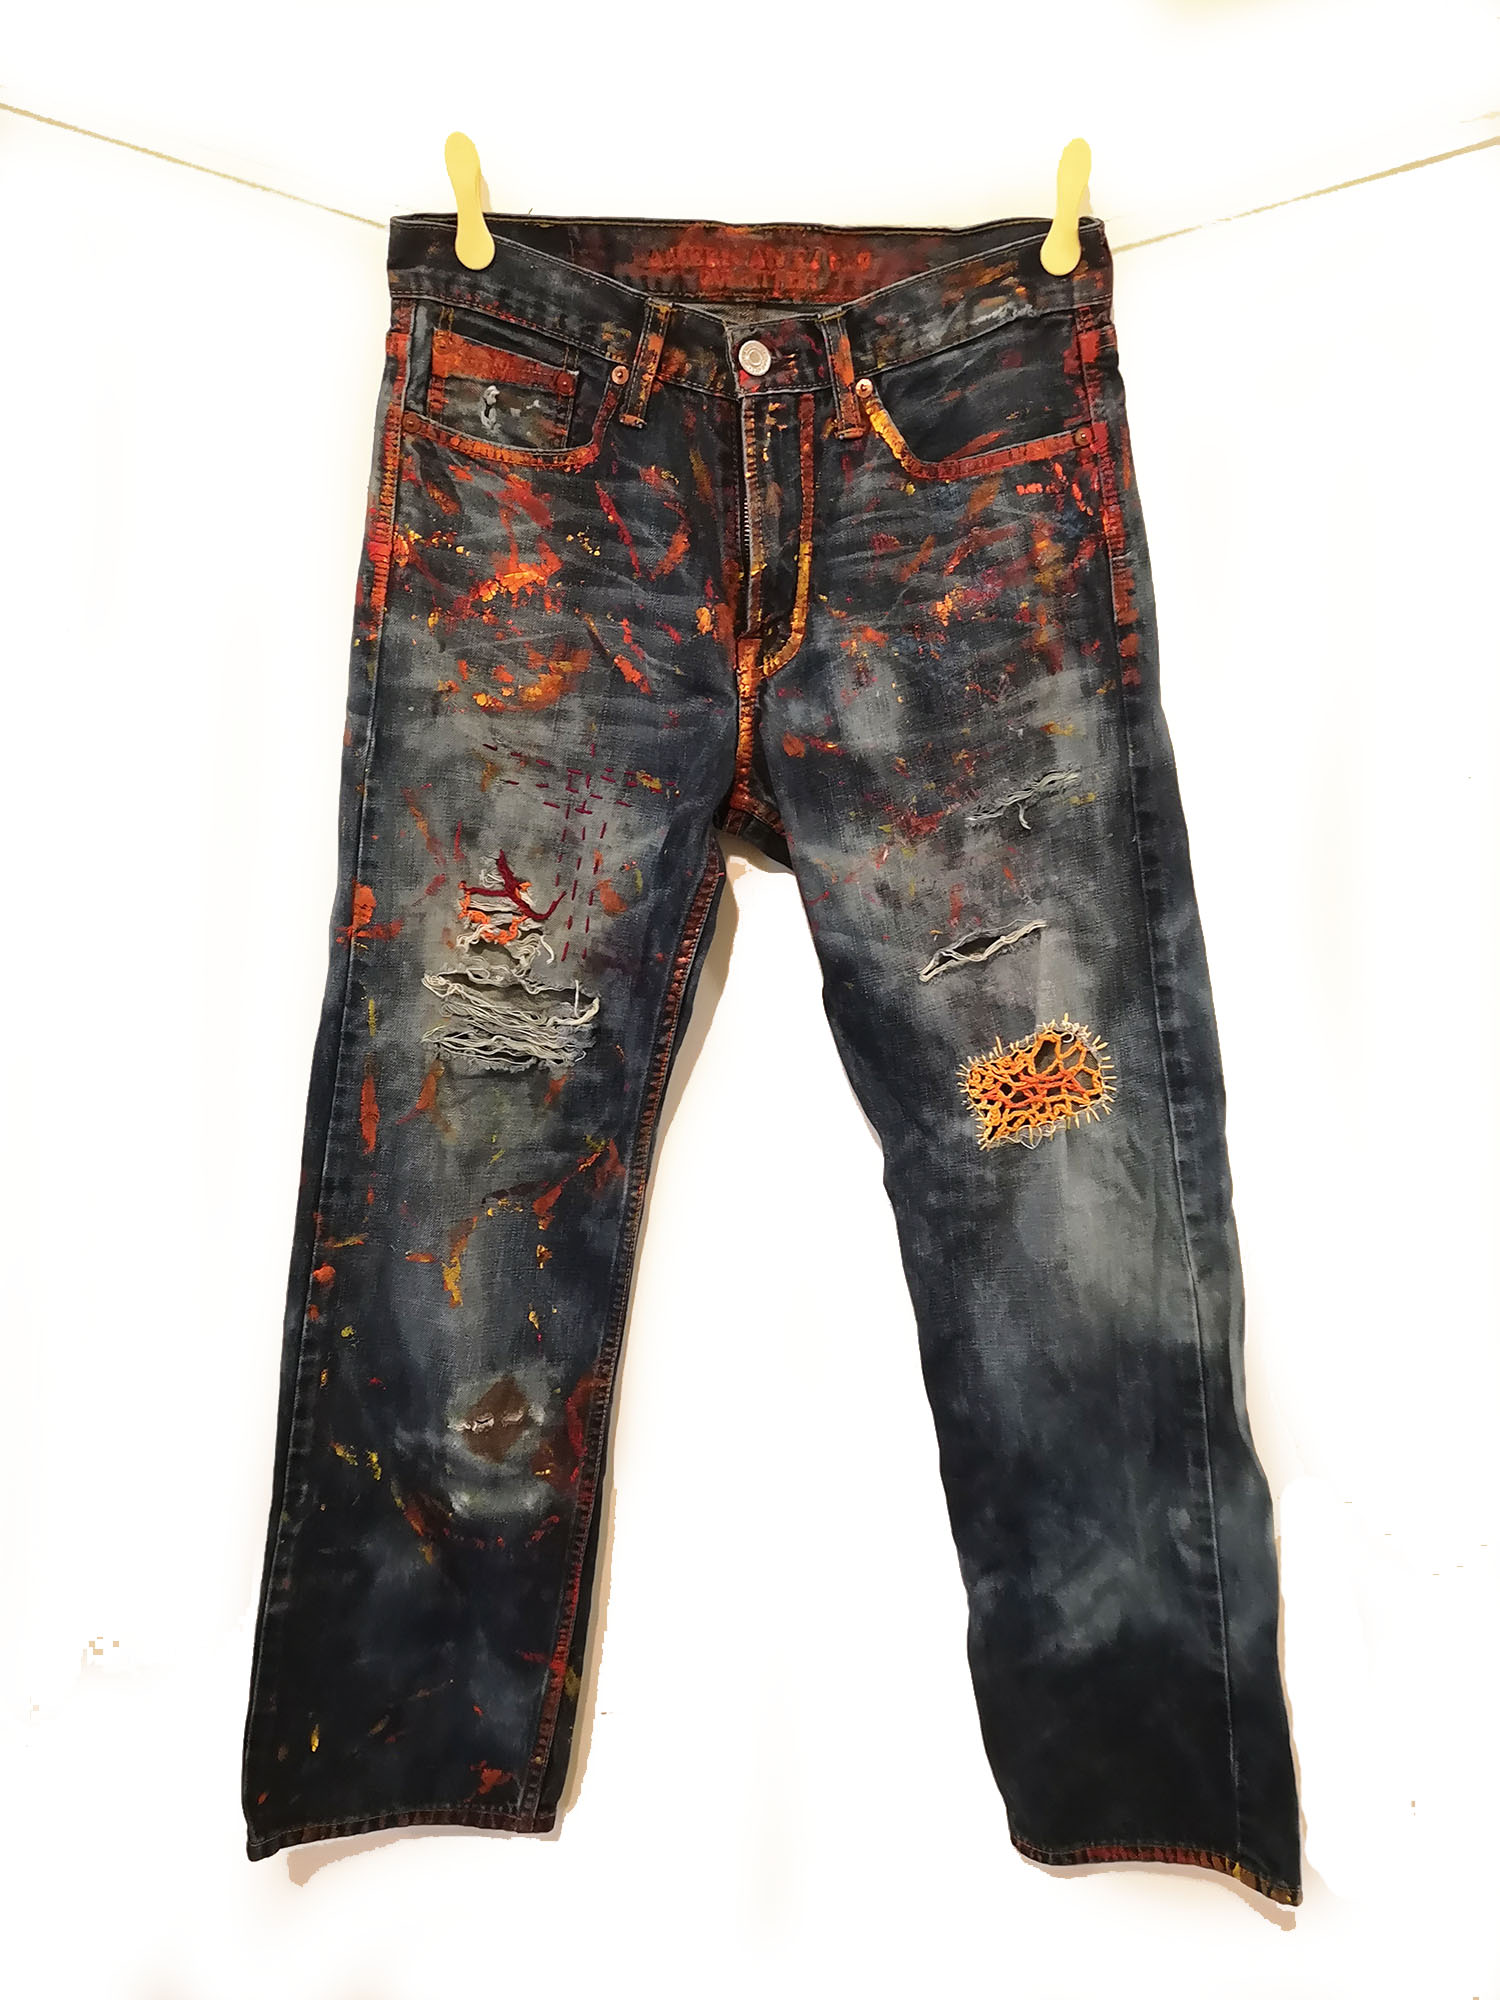 Hand Painted Jeans, Abstract face, Patched Denim